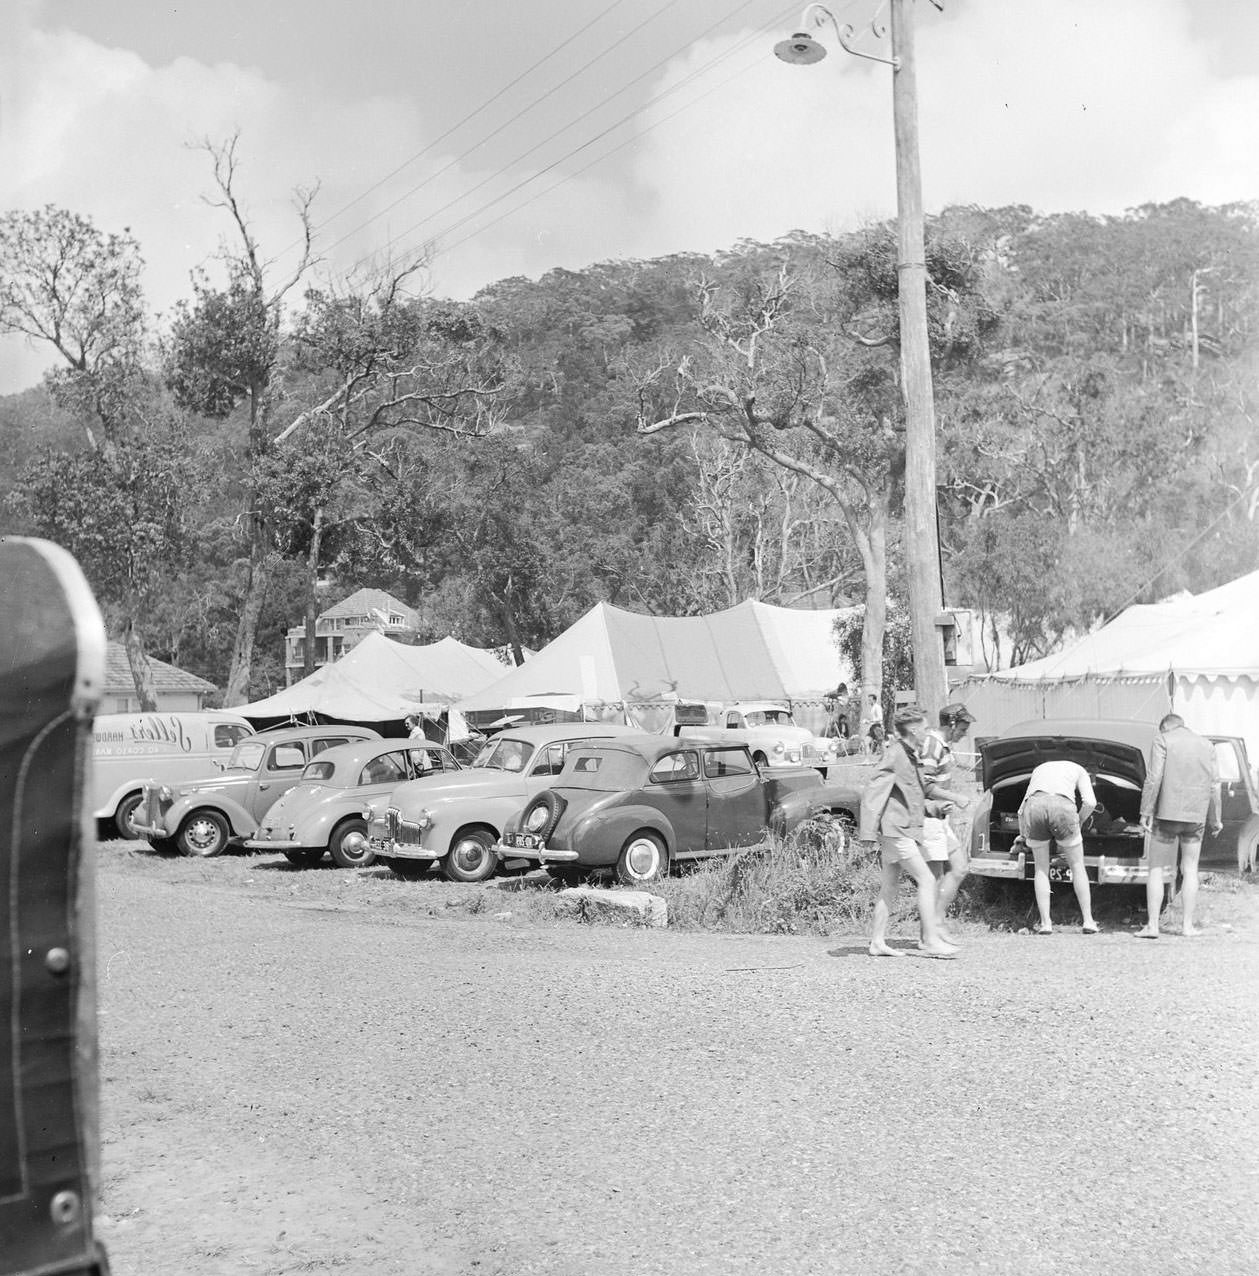 Cars parked at Pittwater for a sailing event